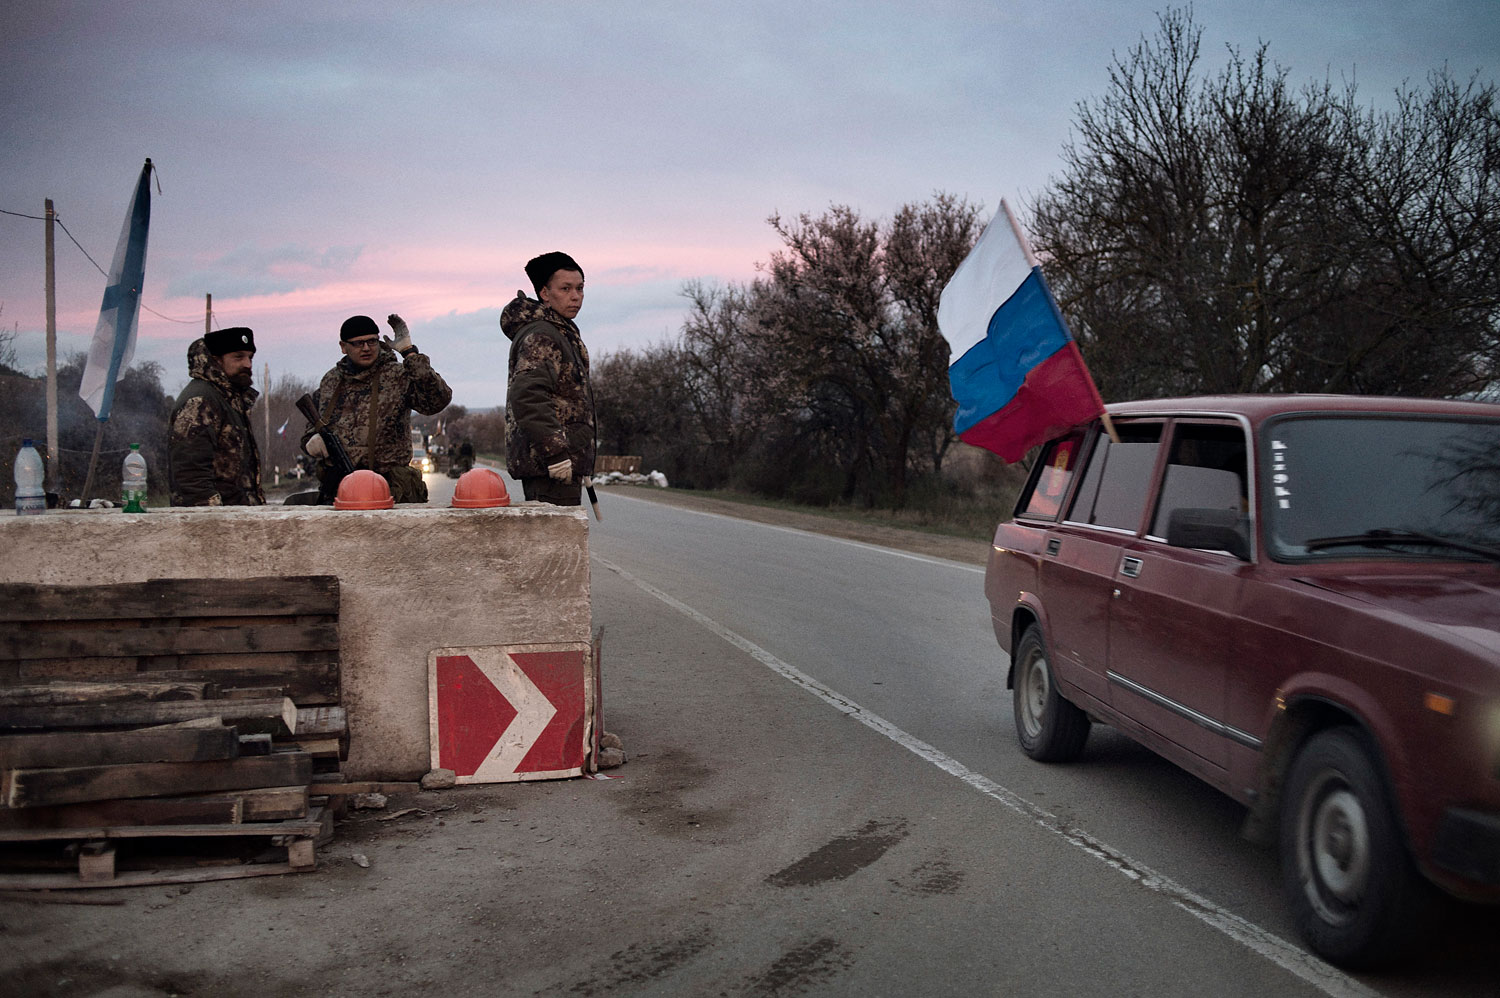 Members of the Cossack paramilitary force in Crimea guard a checkpoint on the highway leading to the city of Sevastopol, home of Russia's Black Sea naval fleet, on March 16, 2014.